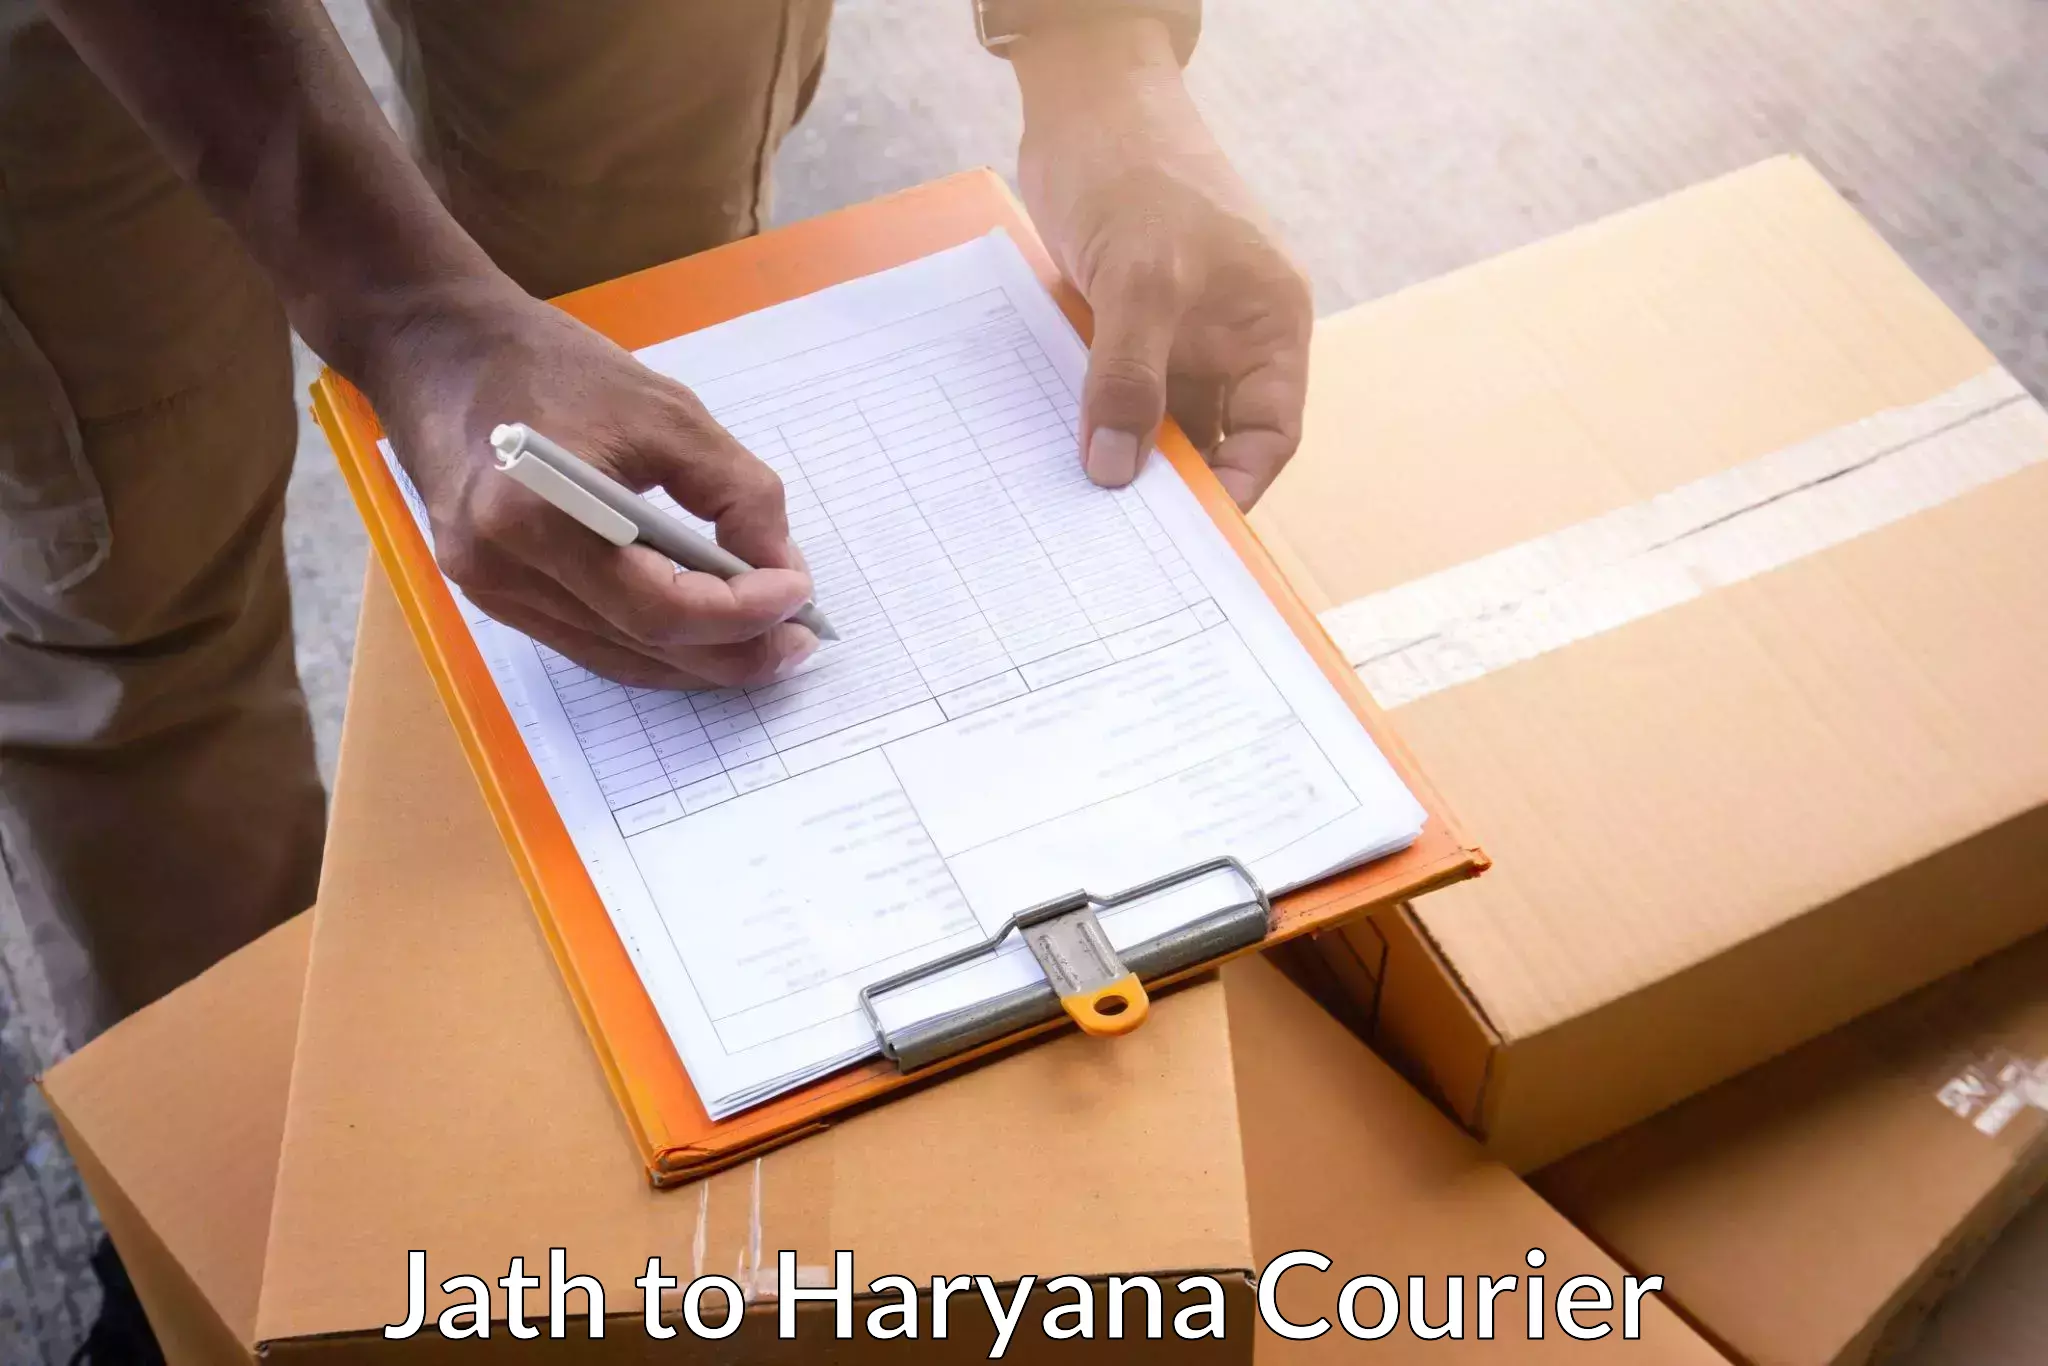 Comprehensive shipping network Jath to Gurgaon